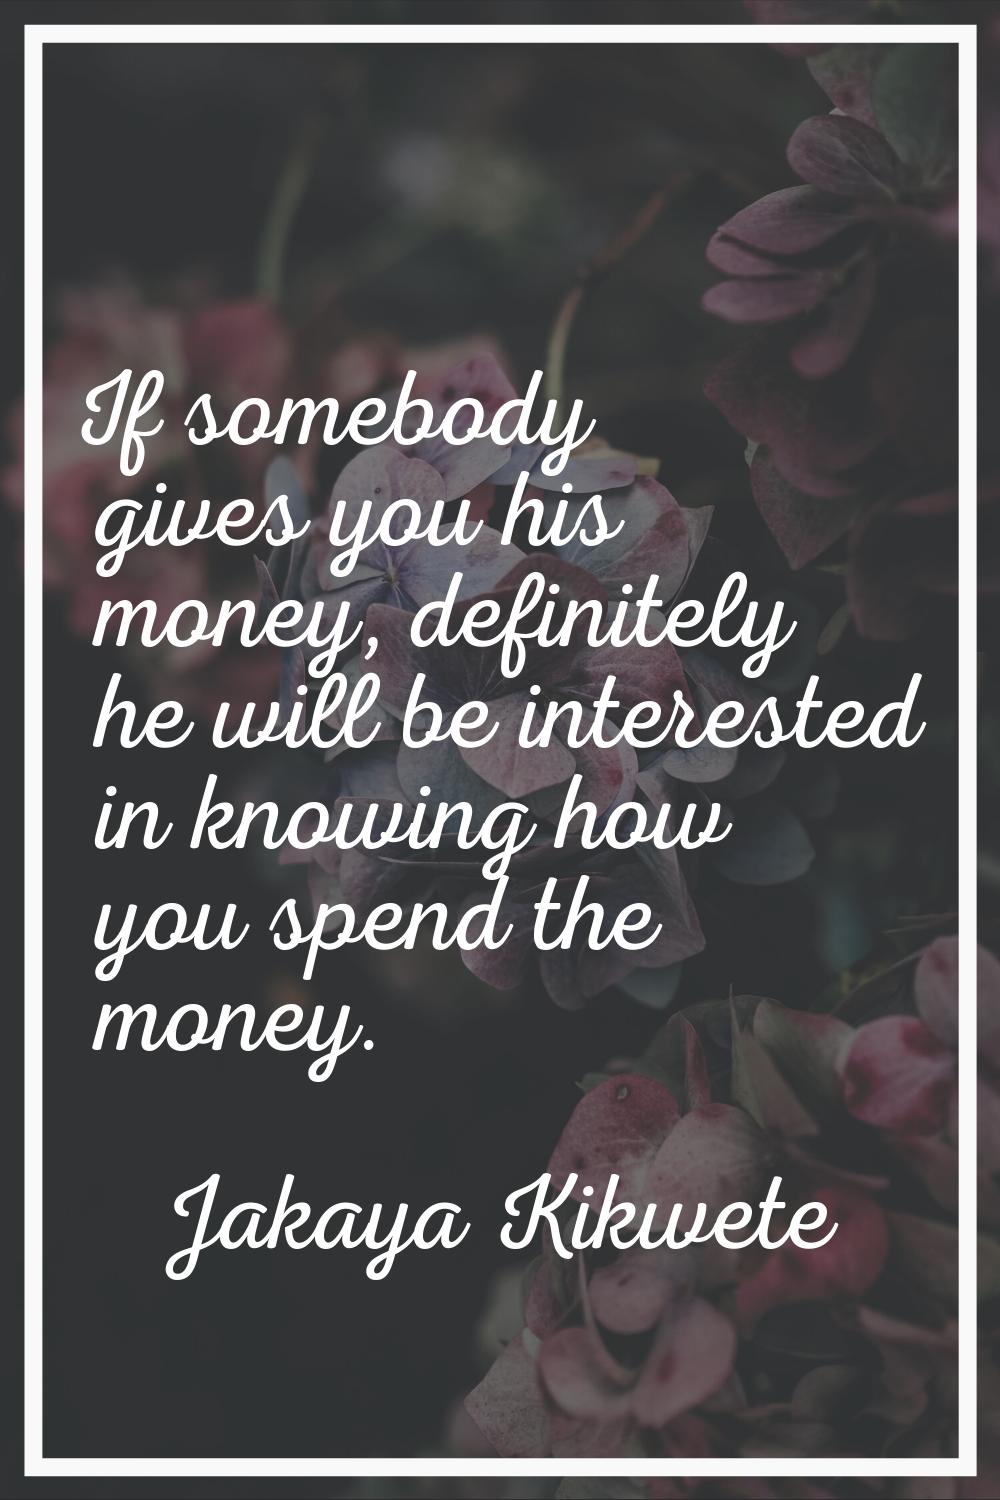 If somebody gives you his money, definitely he will be interested in knowing how you spend the mone